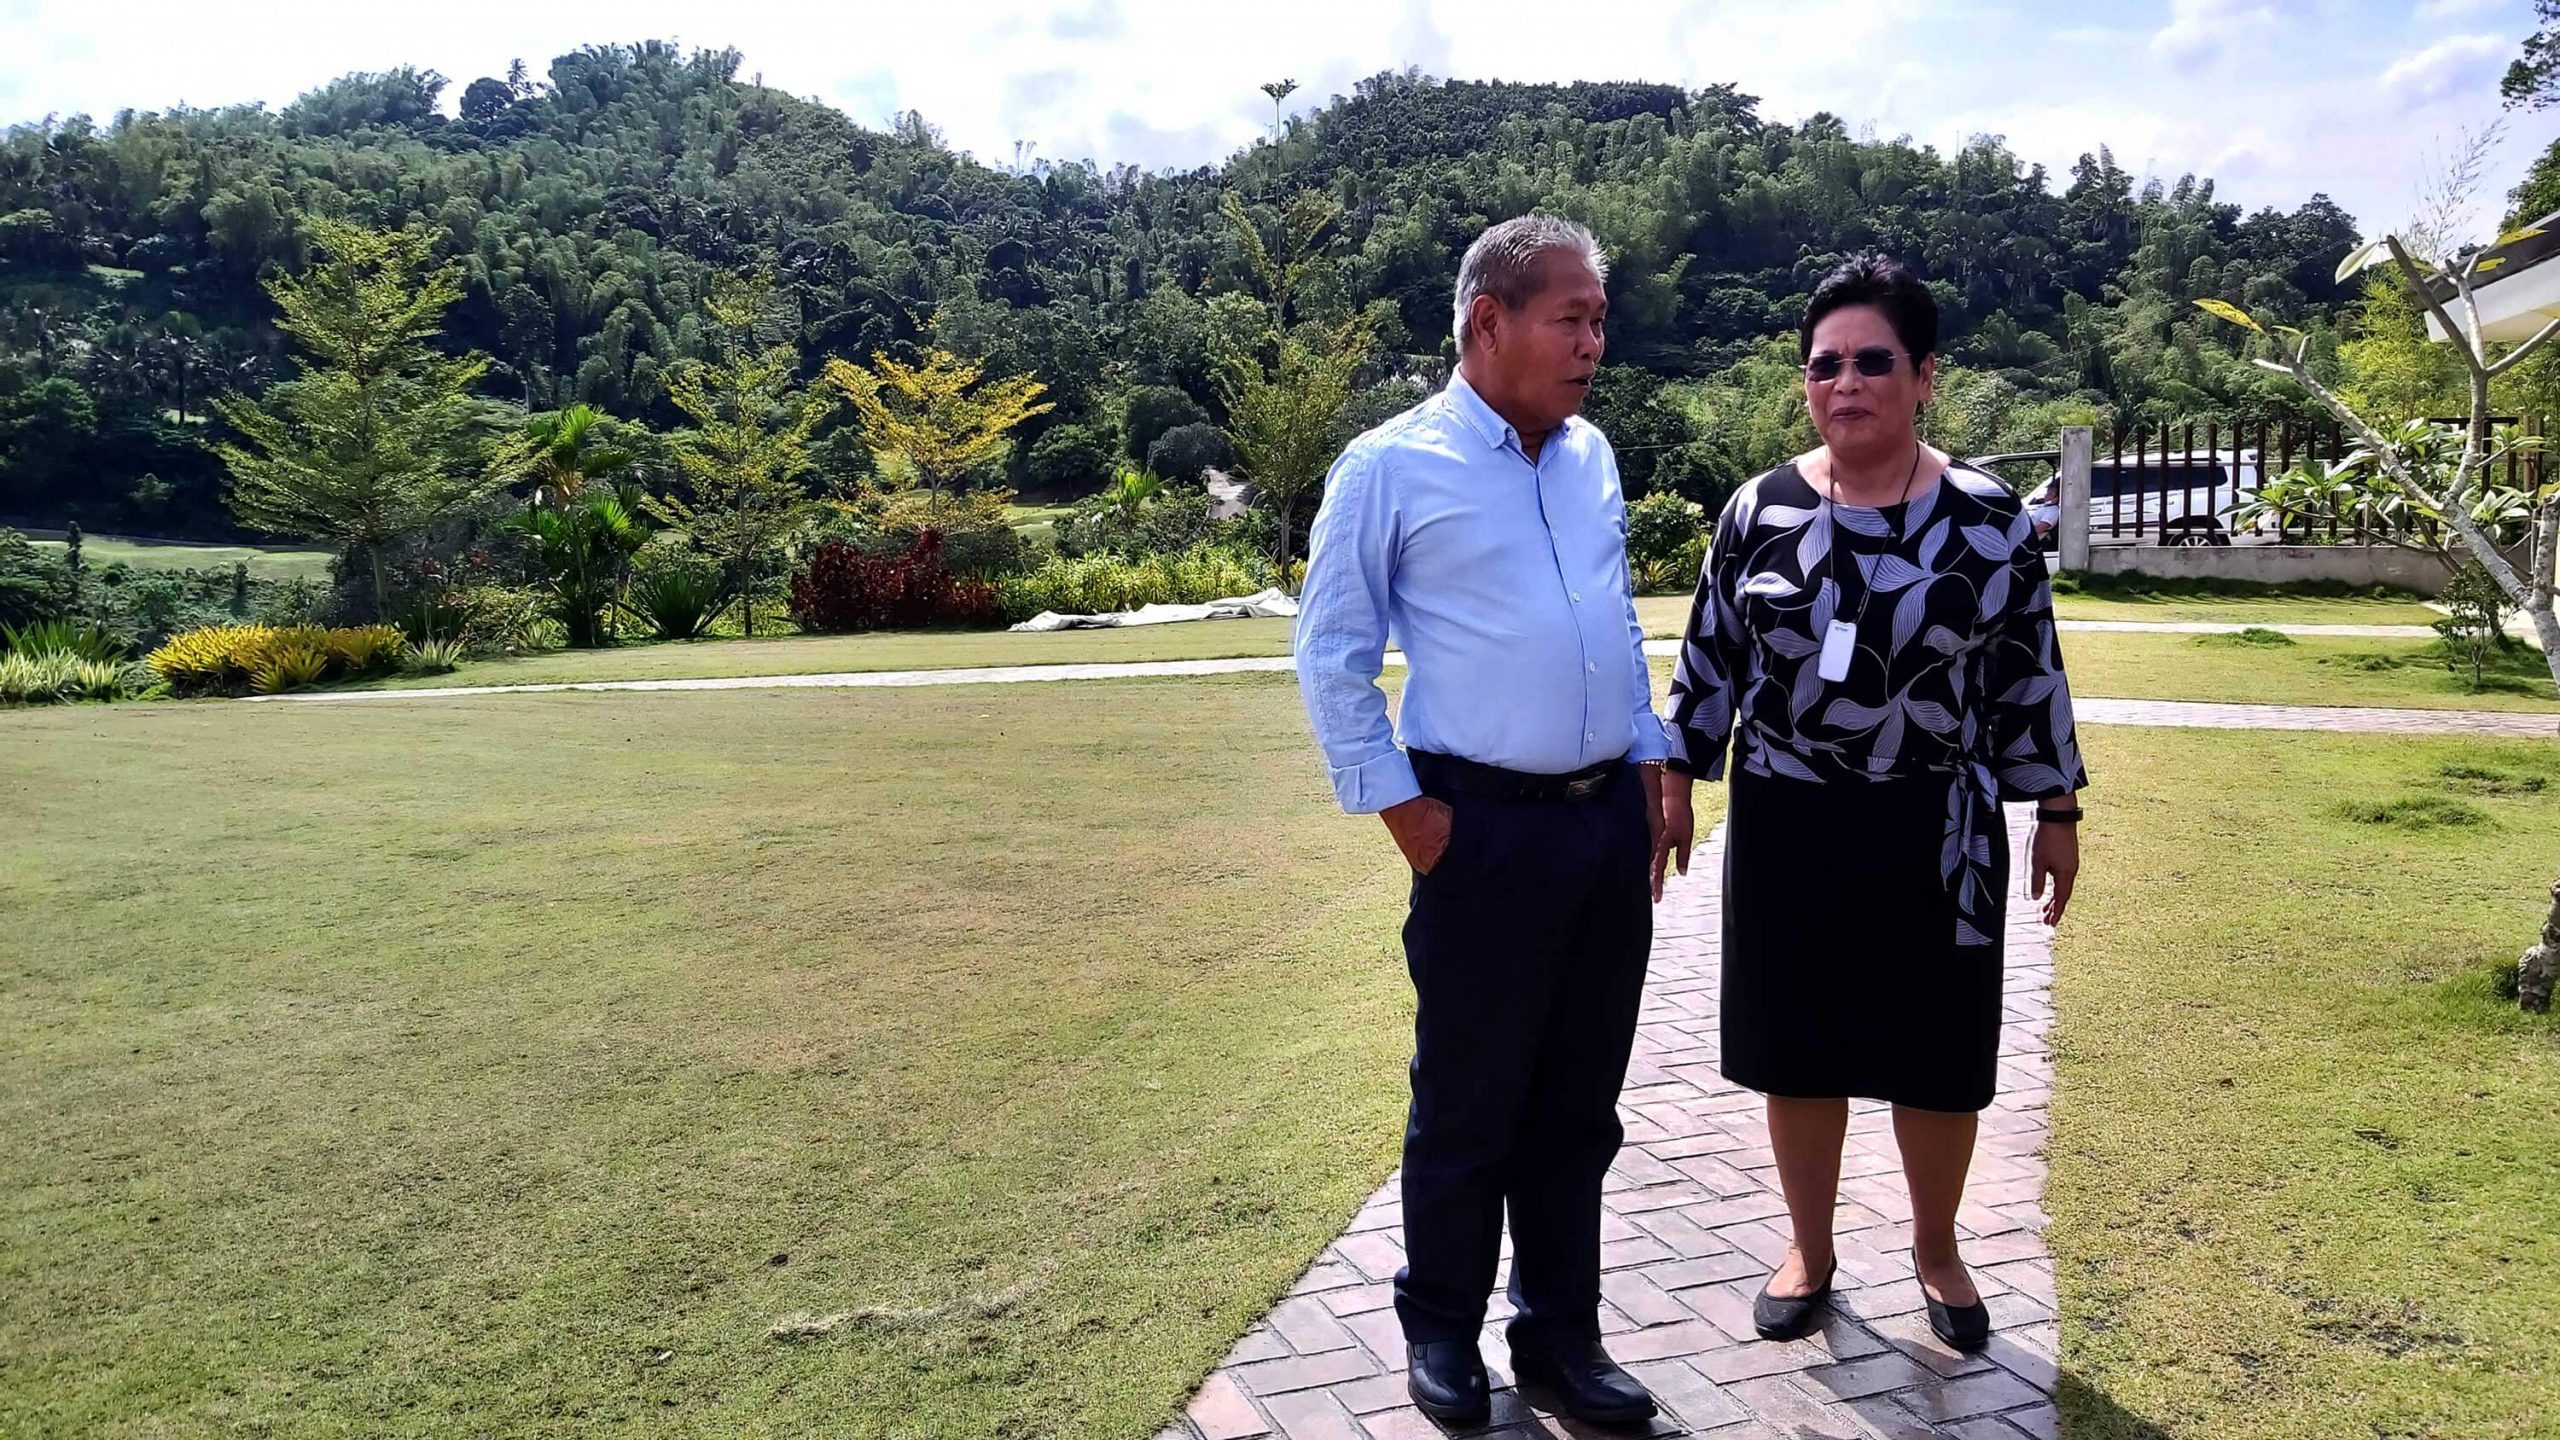 Duros Group Chairman of the Board Rafaelito Barino and President Fe Barino at Liloan Golf, an international golf course their company is completing in Liloan.